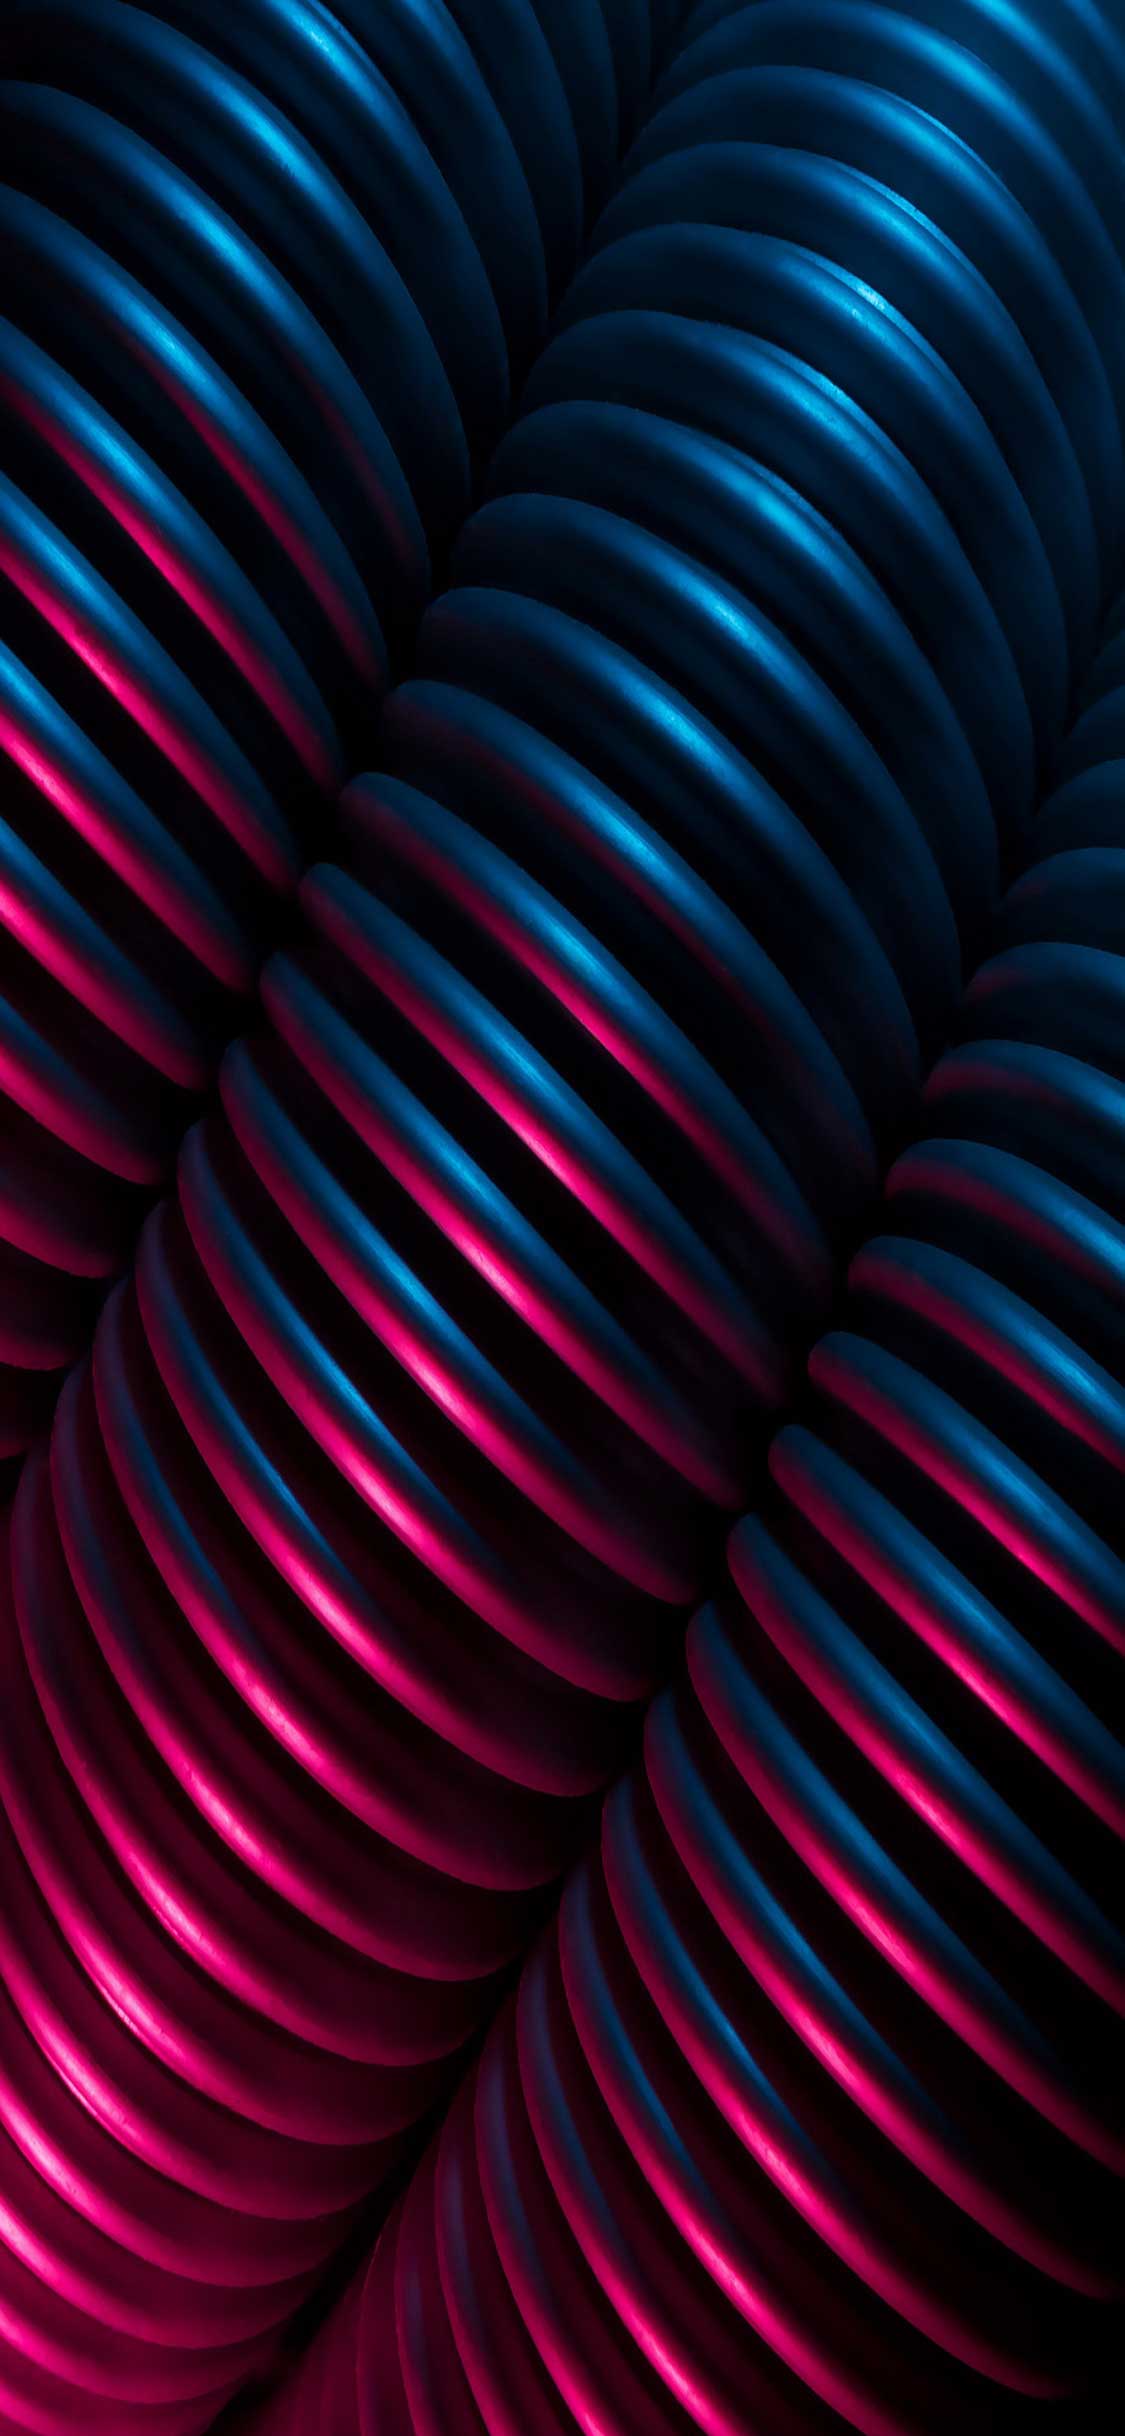 30 New Cool iPhone X Wallpapers Backgrounds to freshen